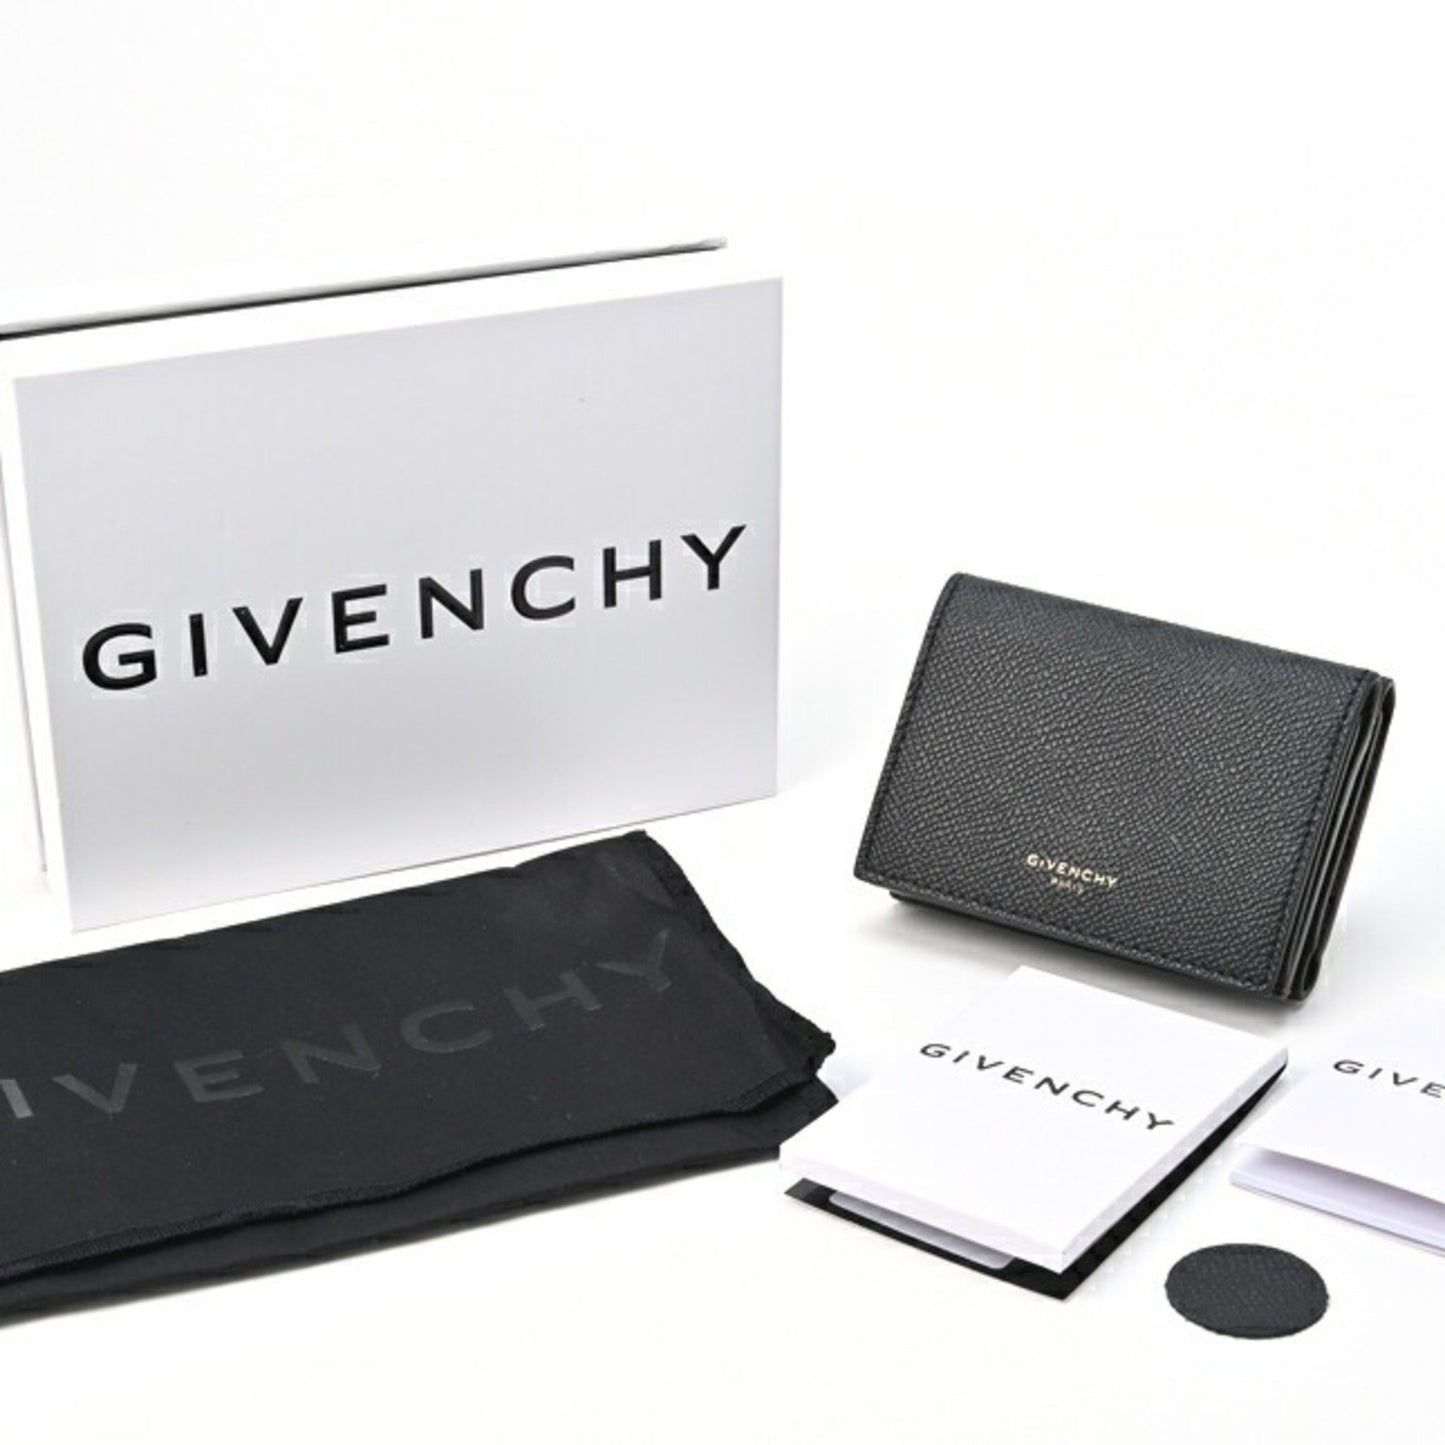 Givenchy Unisex Black Leather Triple Wallet in Black